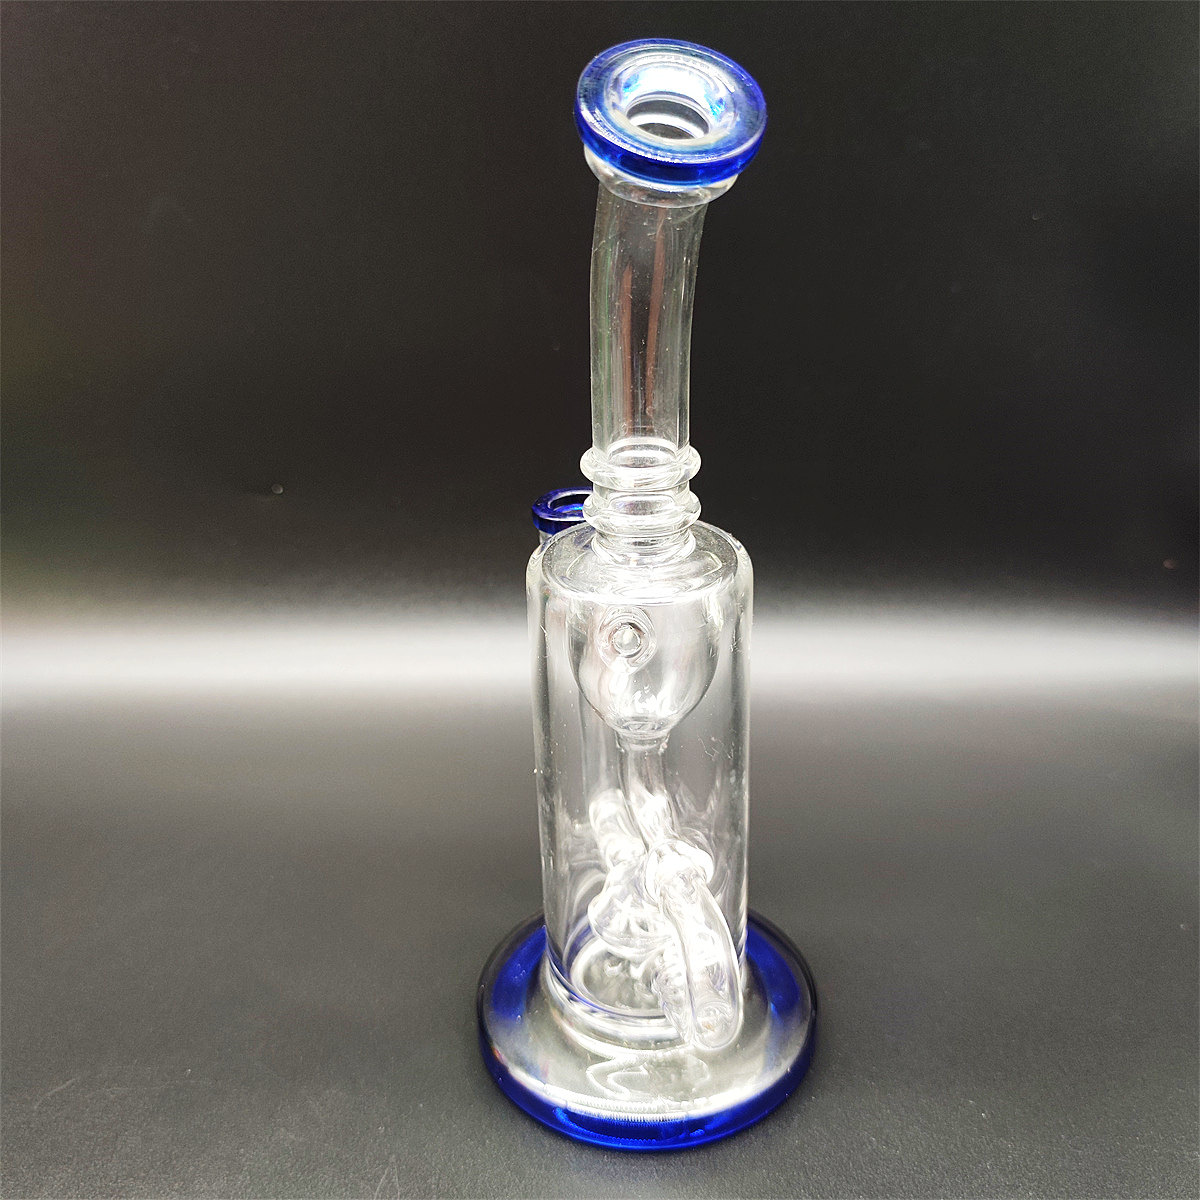 2022 Twin Chamber Fab Egg Slit Hub Heady bog Thicnk Clear Blue 10 Inch Hookah Glass Bong Dabber Rig Recycler Incycler Smoke Pipe Slit Puck 14.4mm Joint Perc